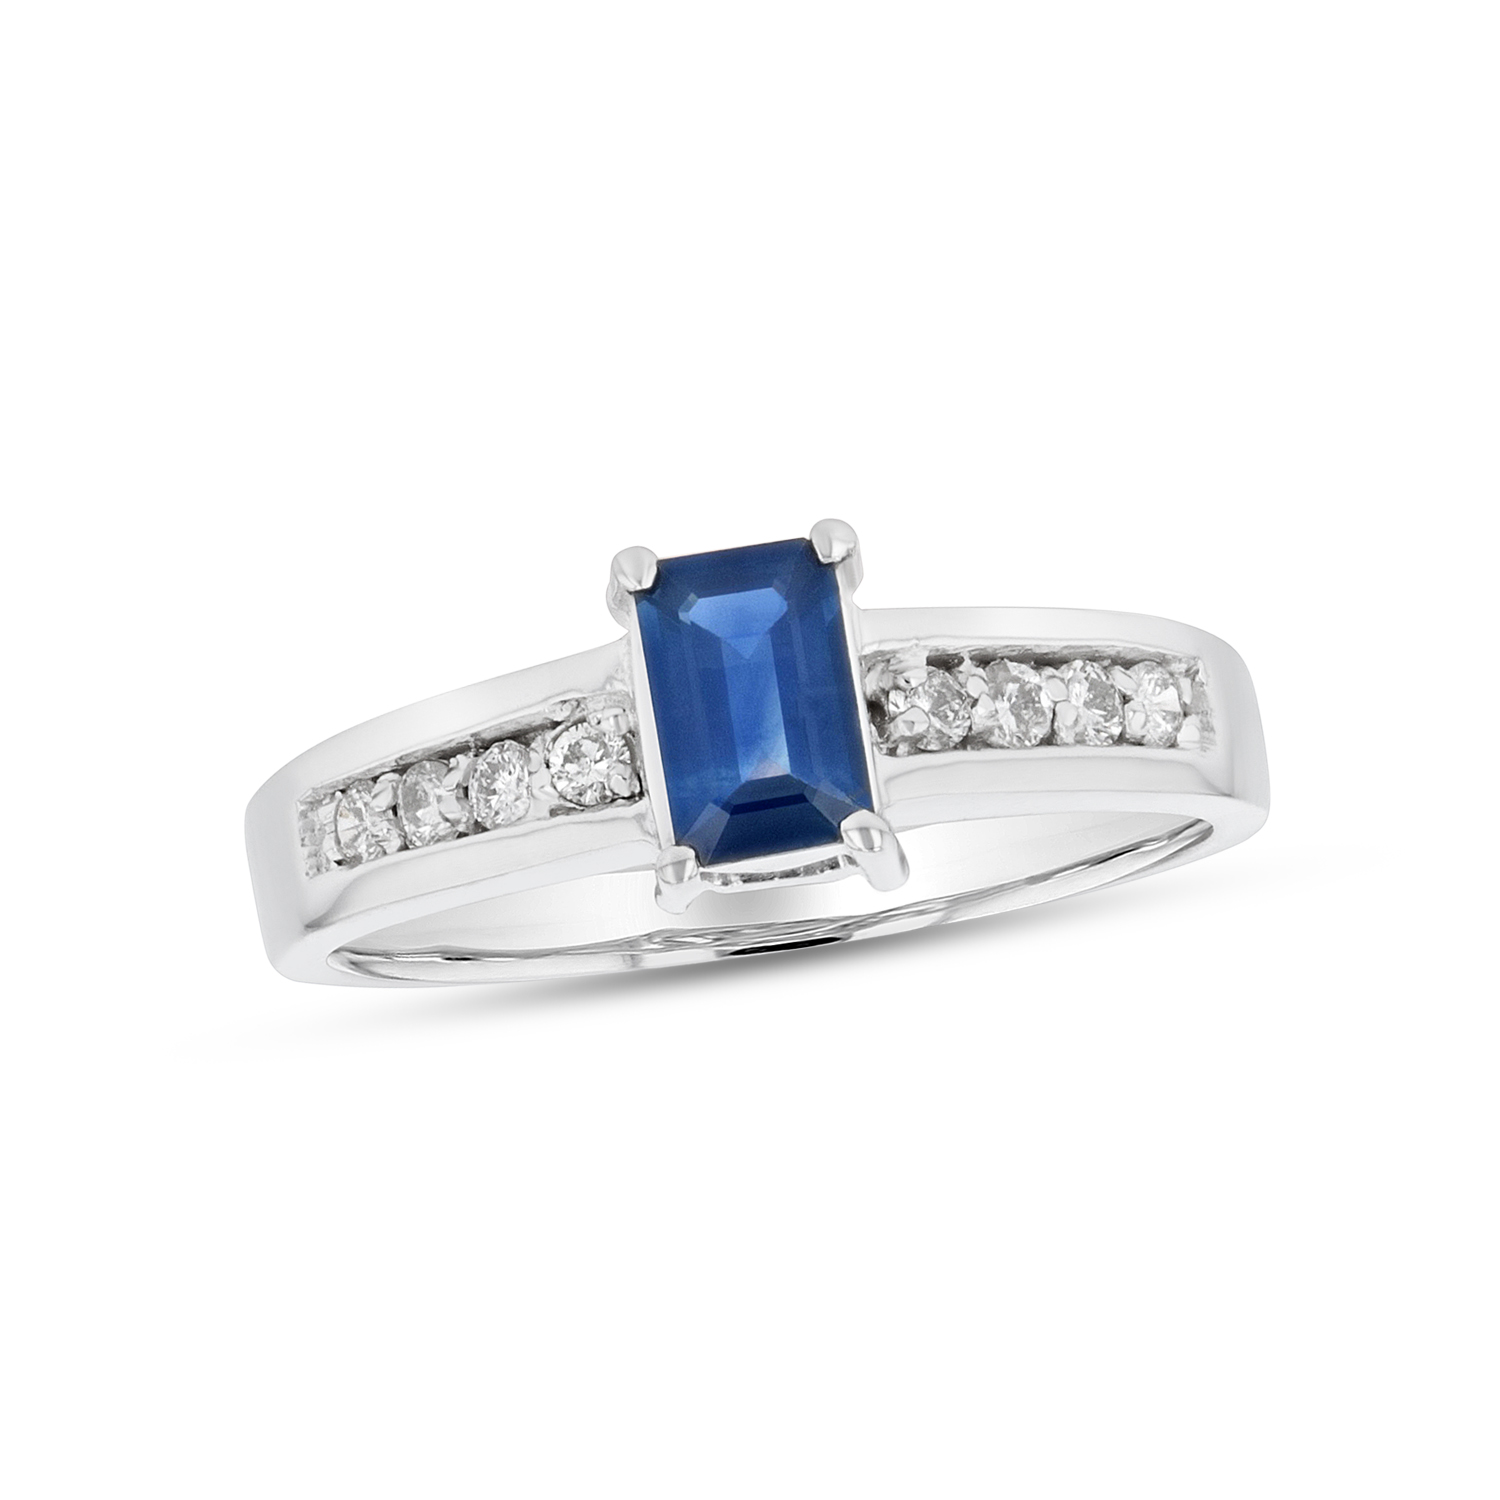 View 0.81ctw Diamond and Sapphire Ring in 14k White Gold